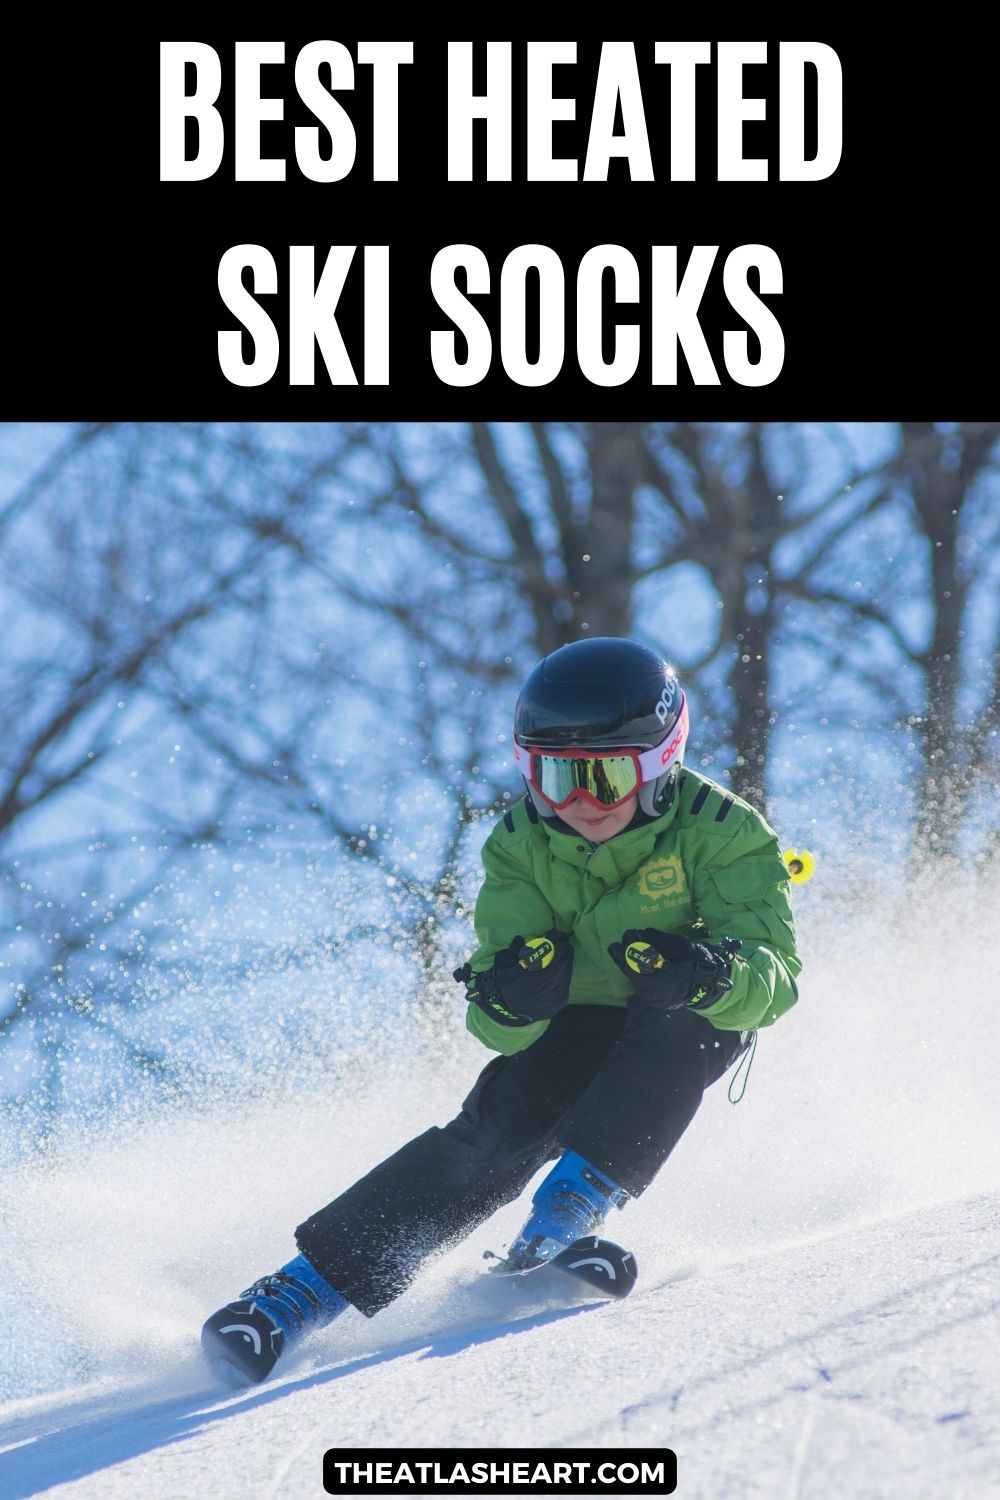 A young boy in a green ski jacket skis down a snowy hillside on a sunny day, with the text overlay, "Best Heated Ski Socks."